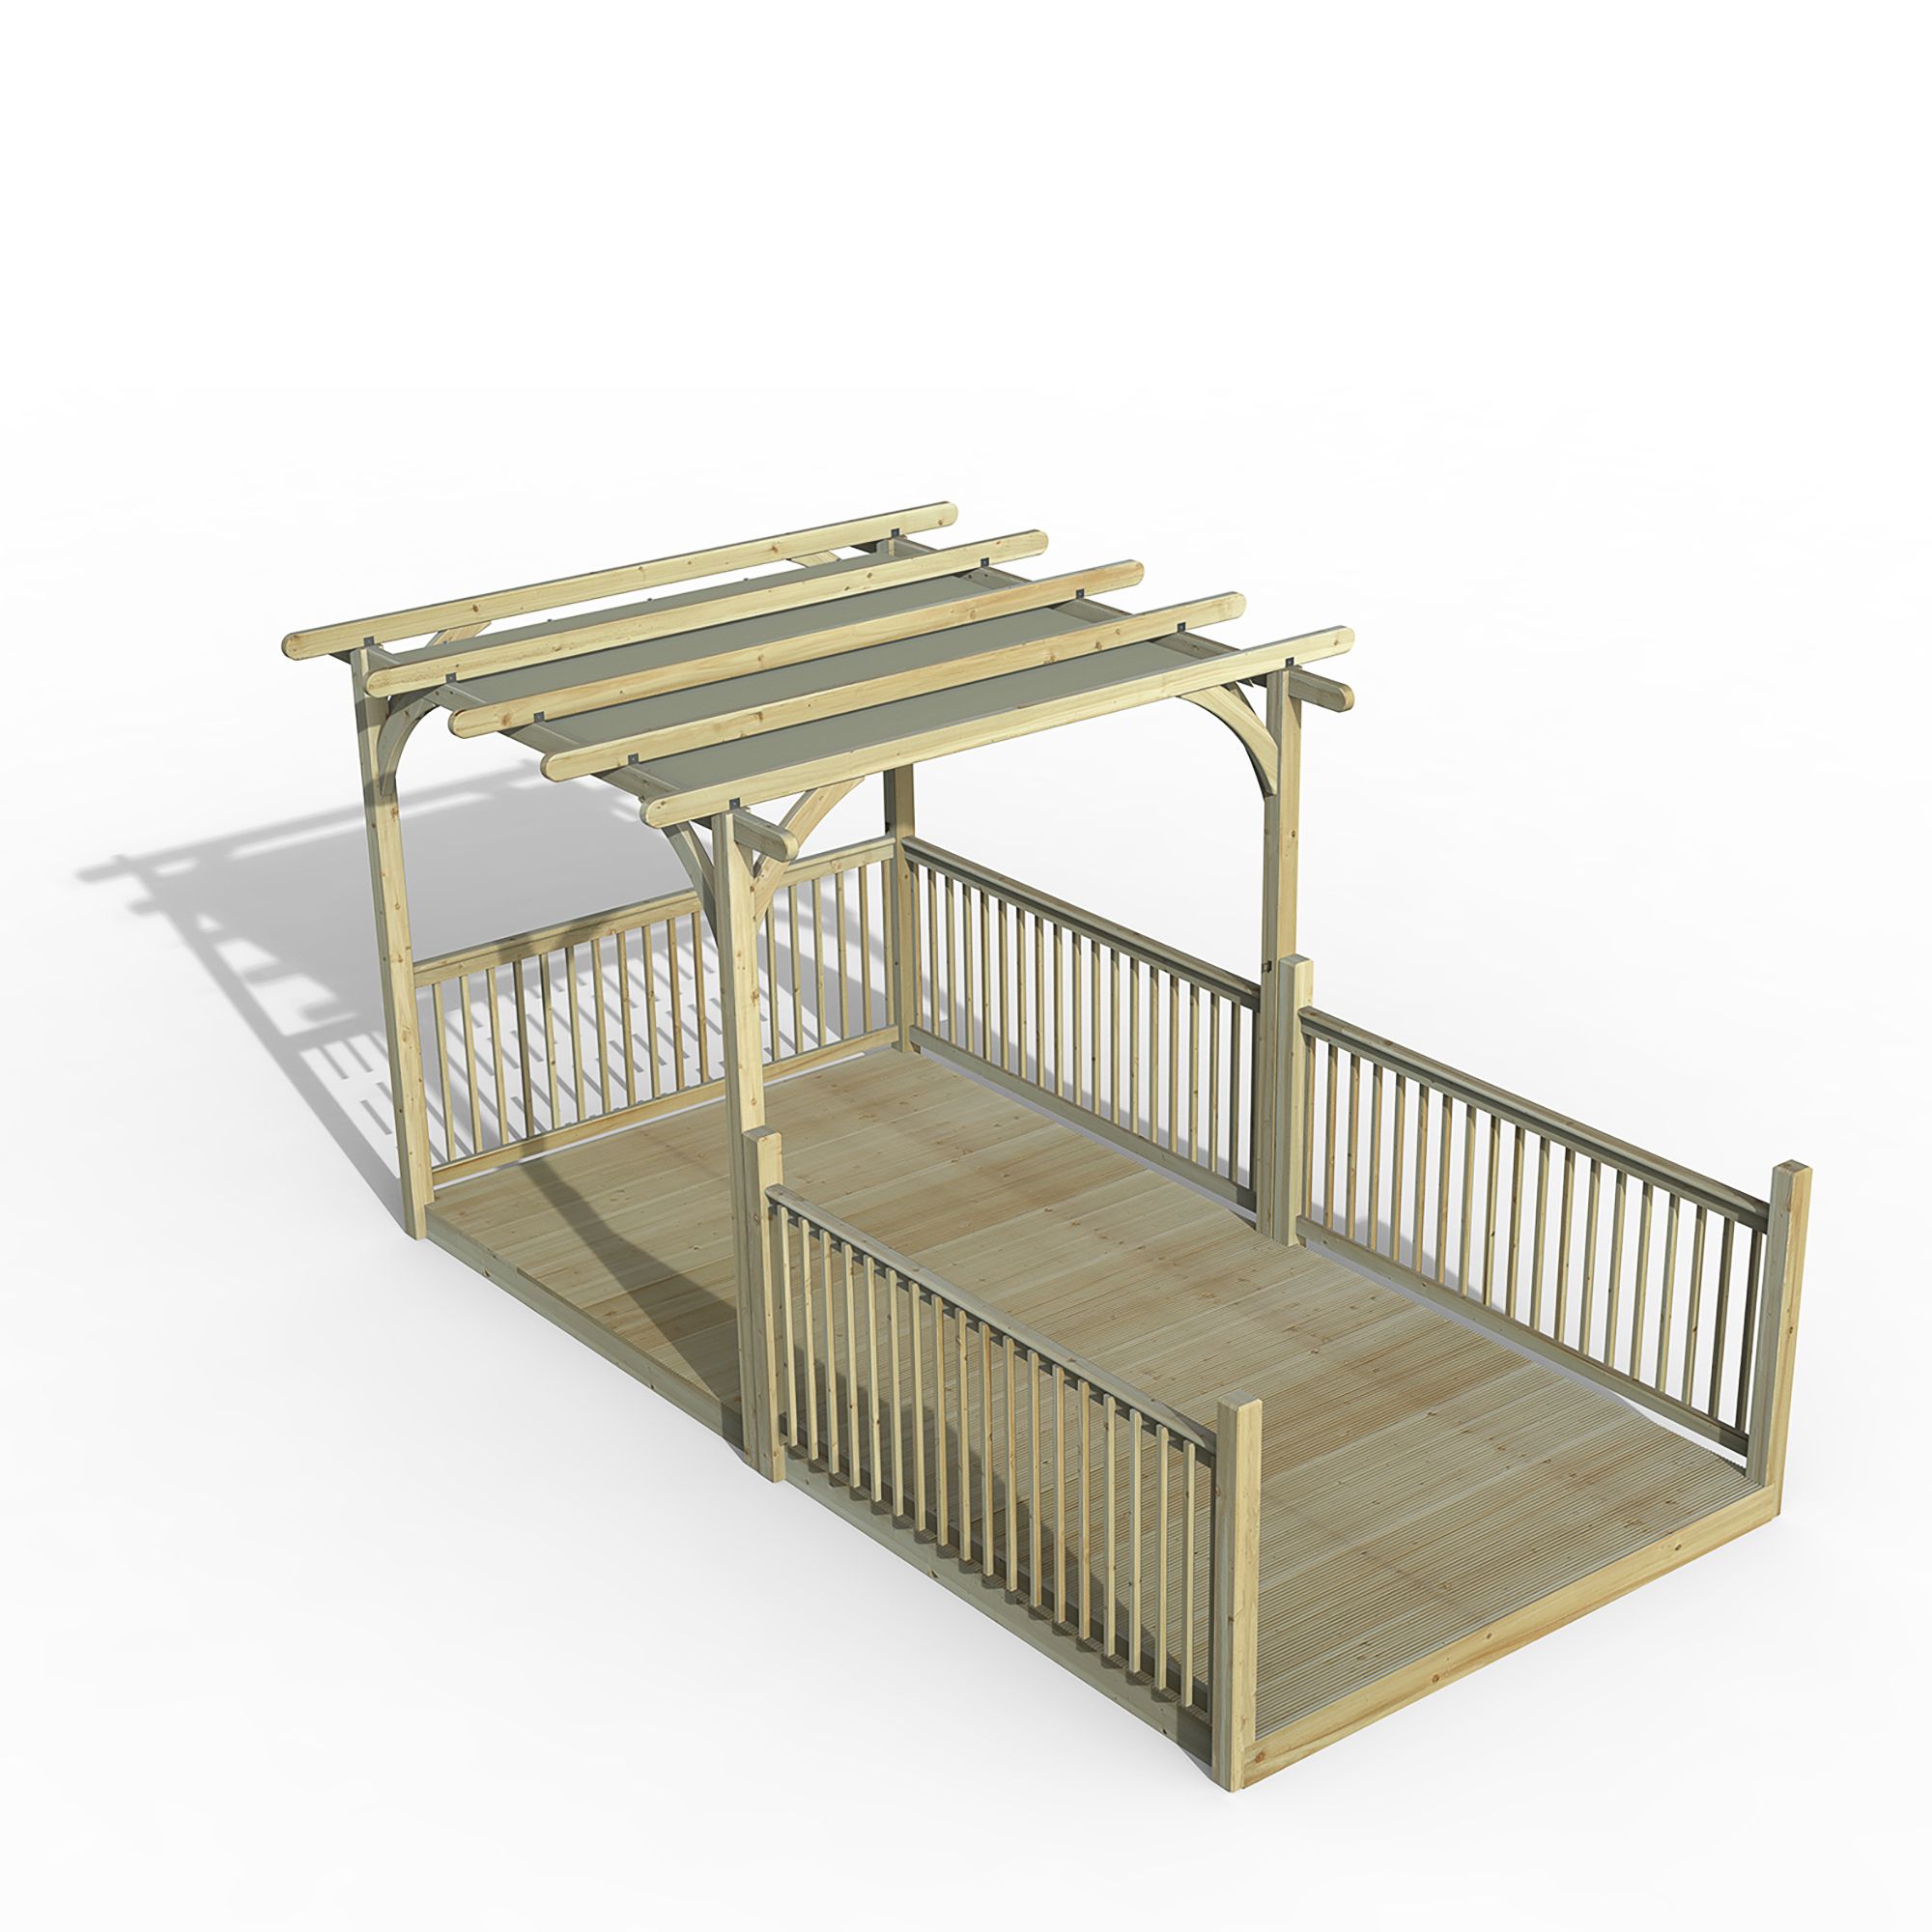 Forest Garden Grey Rectangular Pergola & decking kit, x4 Post x4 Balustrade (H) 2.5m x (W) 5.2m - Canopy included